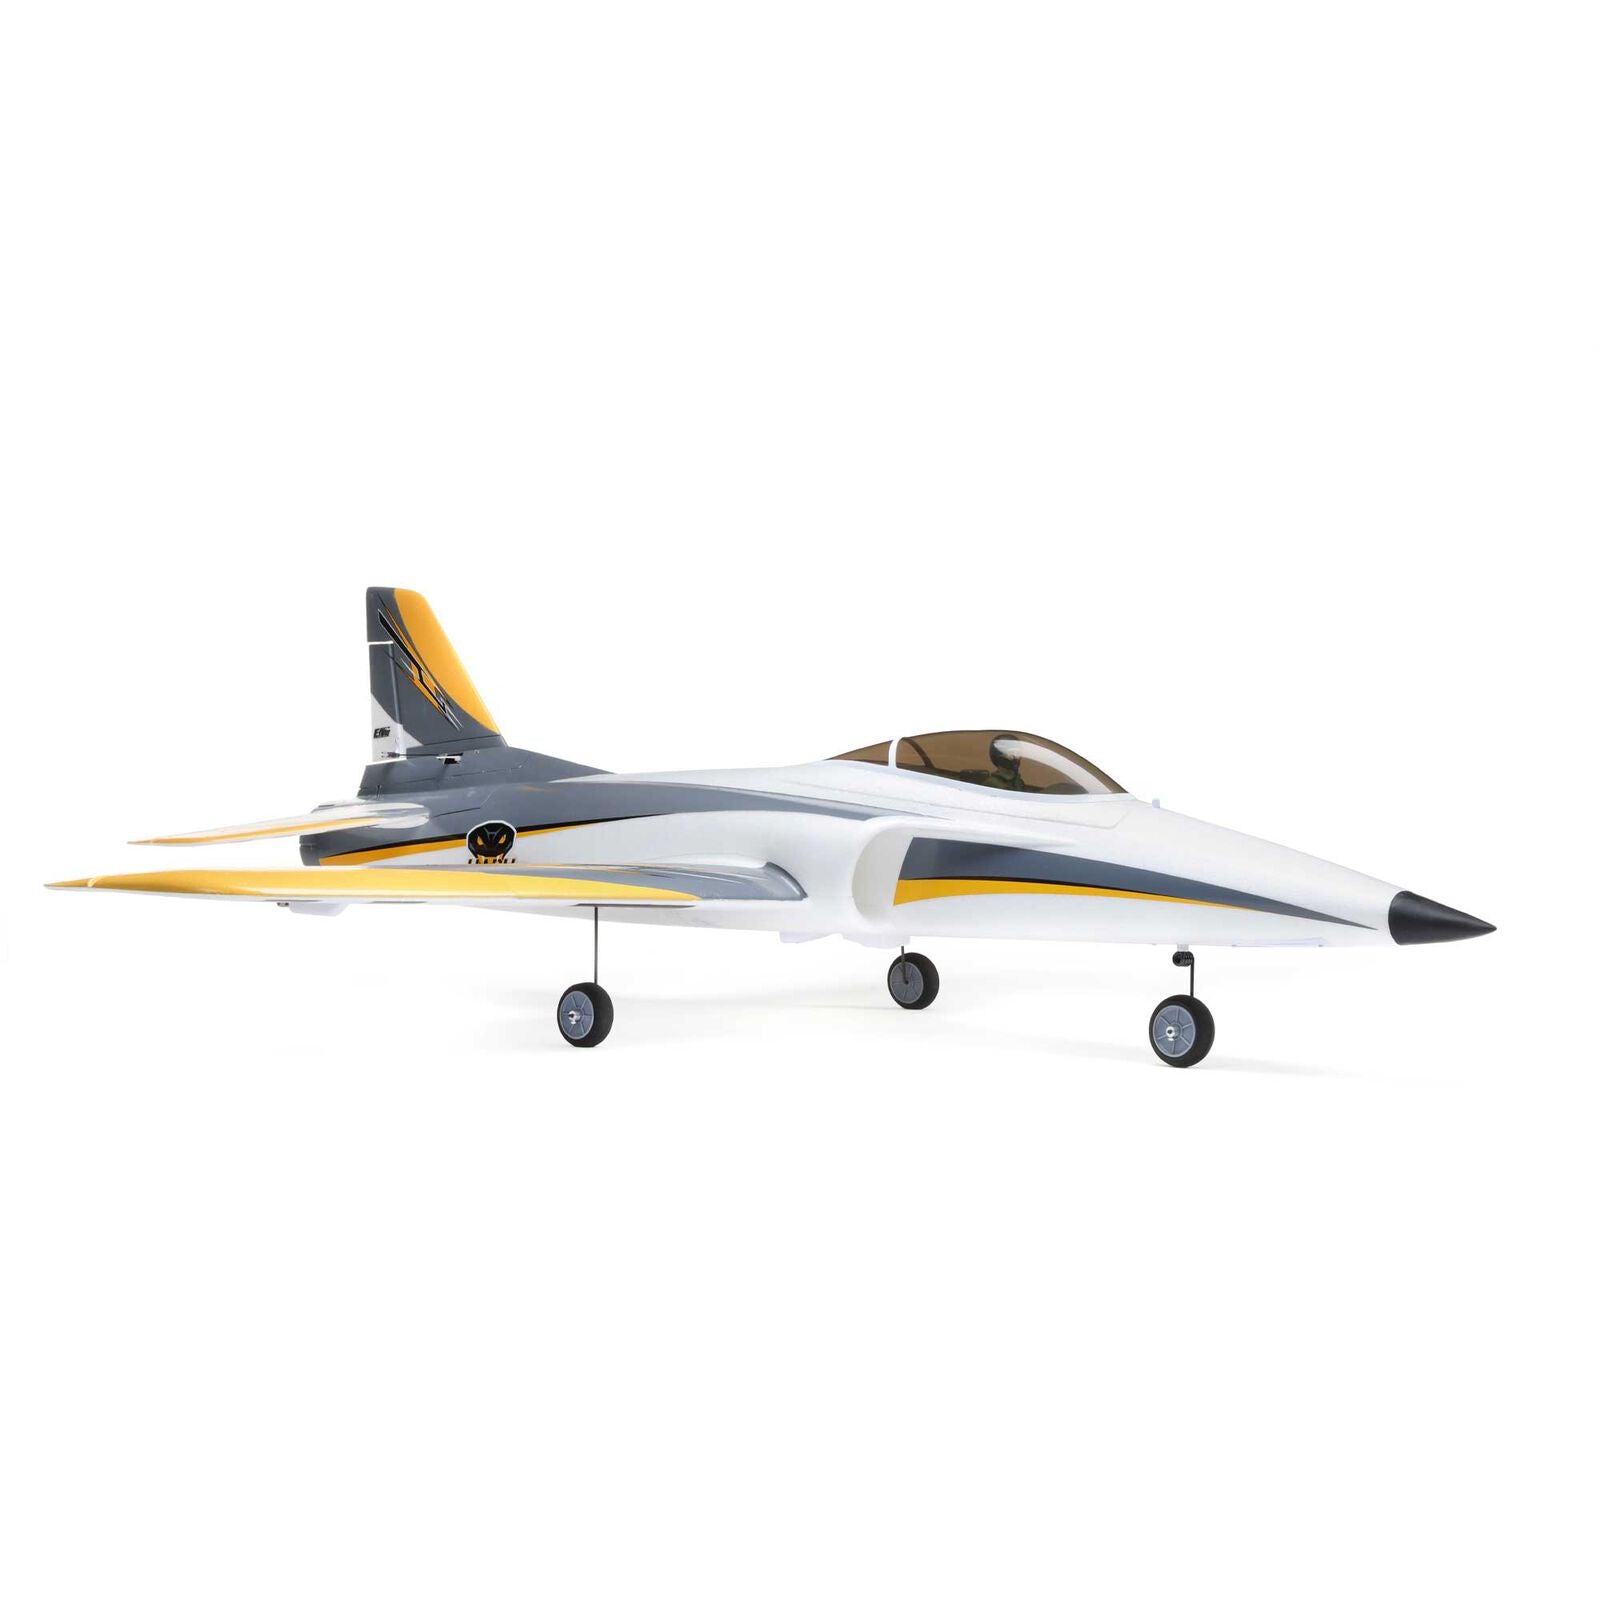 E-flite Habu SS (Super Sport) 70mm EDF Jet BNF Basic with SAFE Select and AS3X - EFL0950